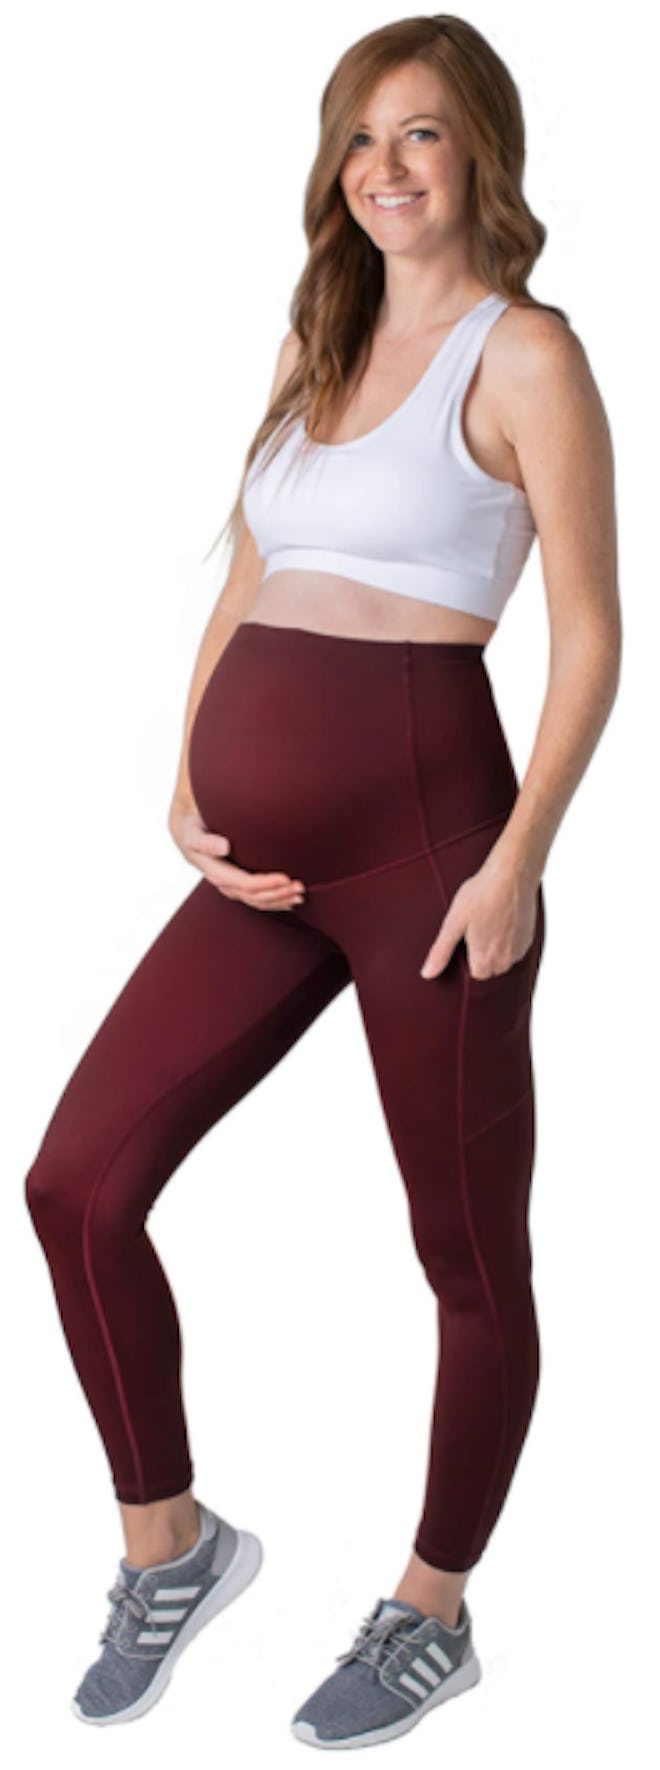  Enerful Womens Maternity Workout Leggings Over The